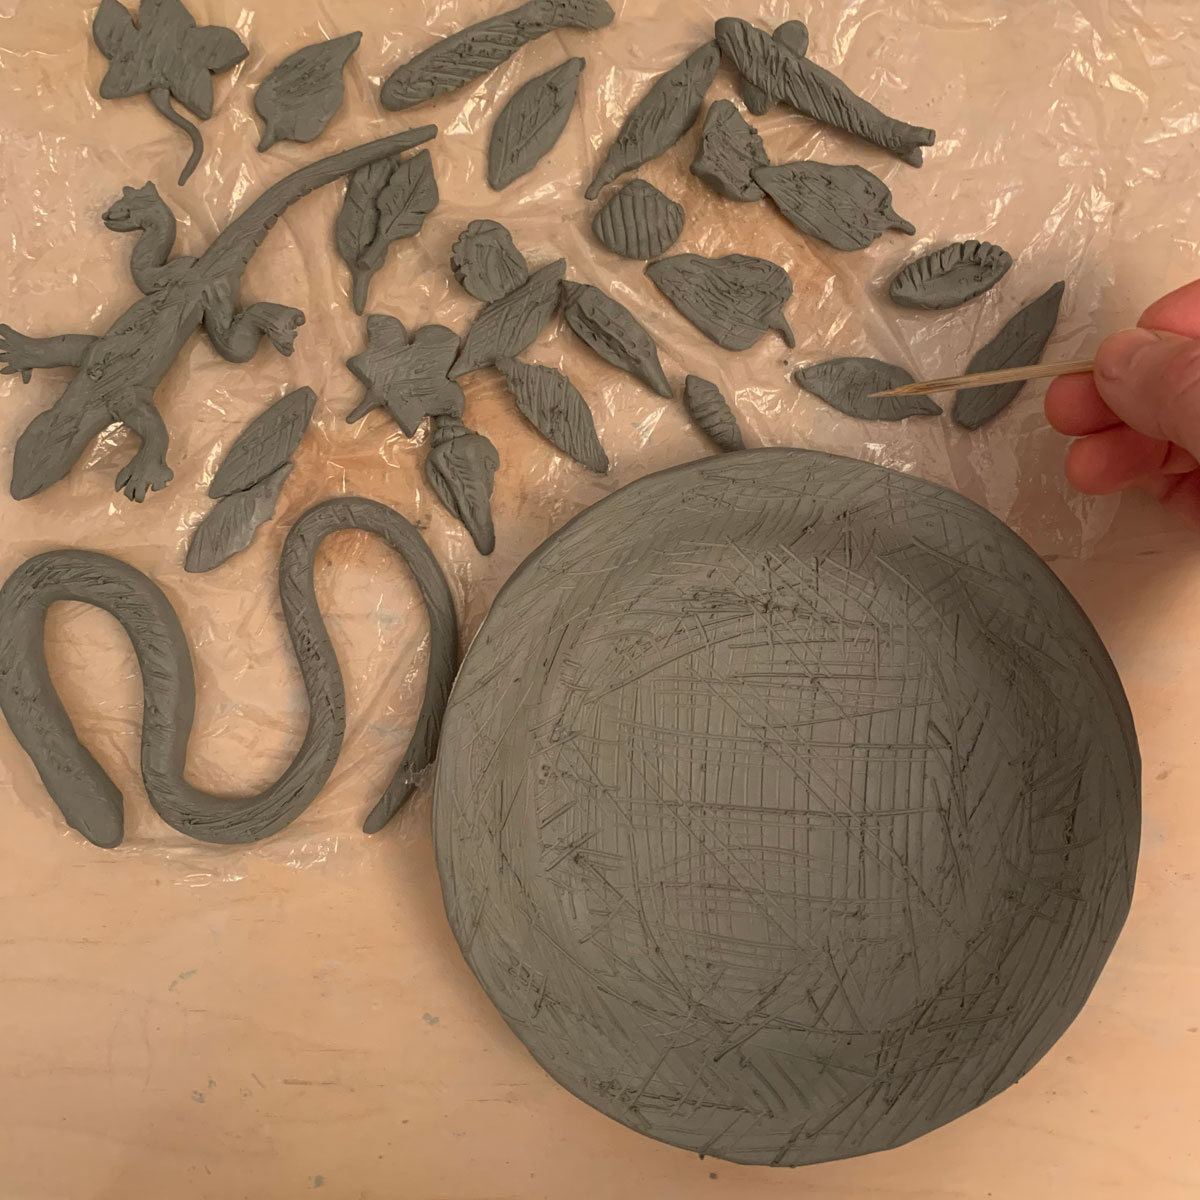 Clay plate and creatures with scratch marks